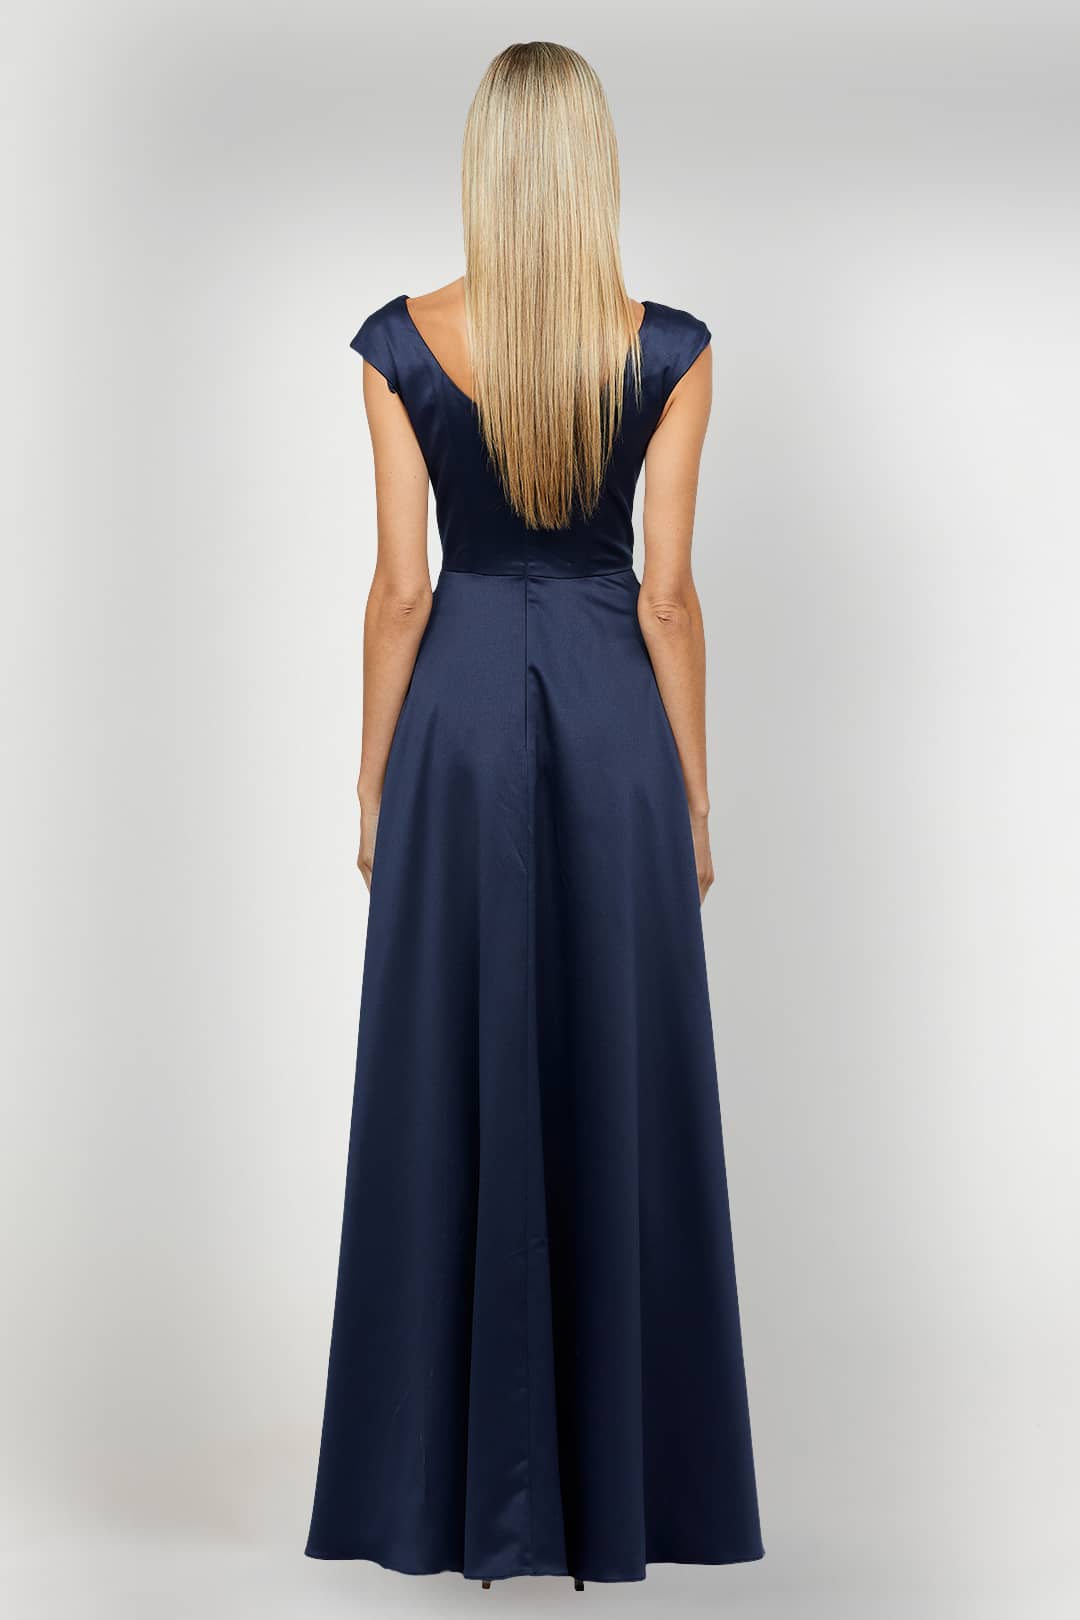 Cora Cap SLeeve Gown-Bariano- Gown Rental Back